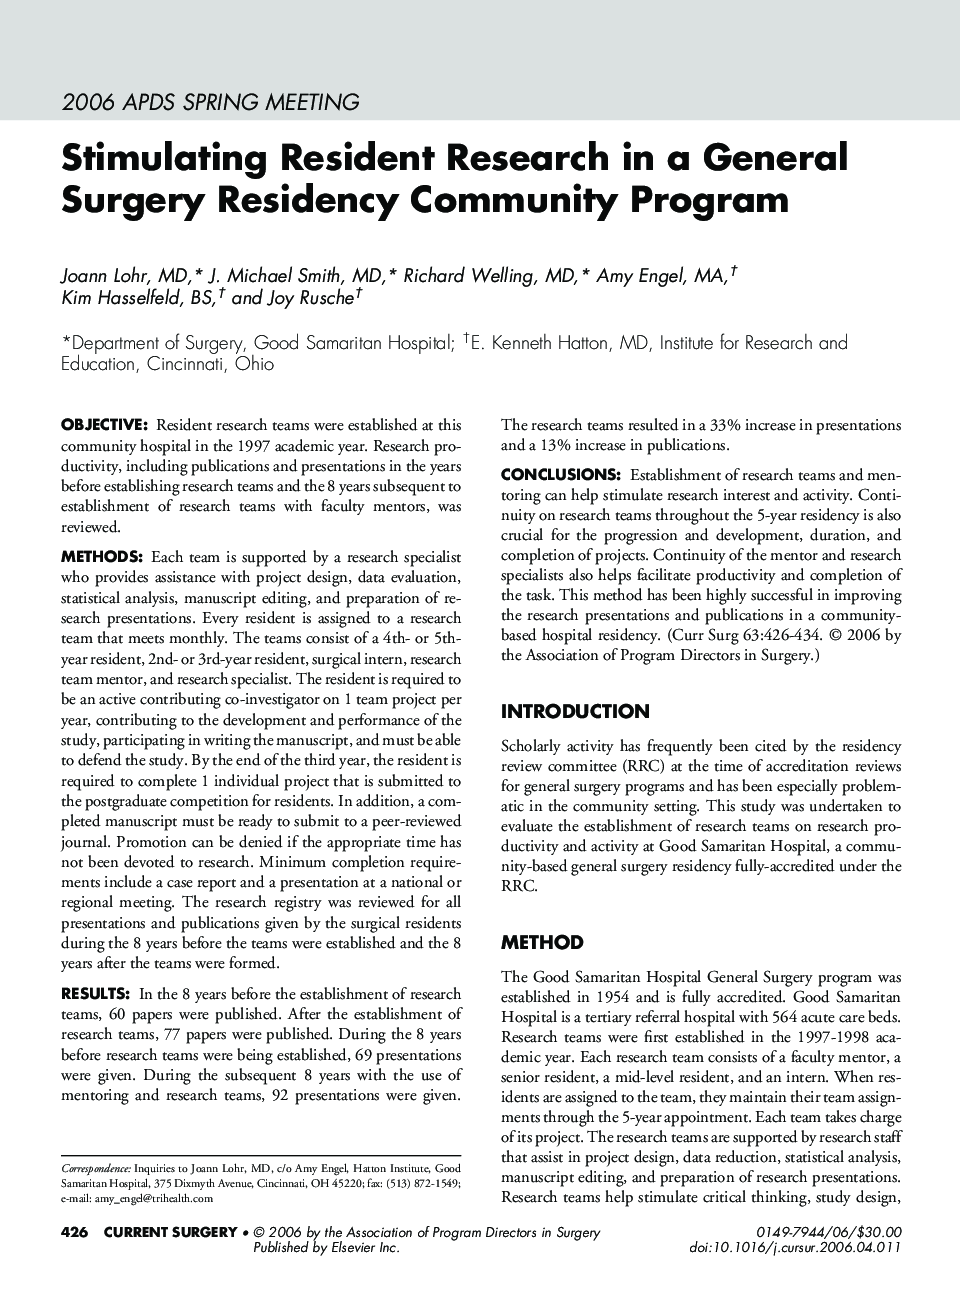 Stimulating Resident Research in a General Surgery Residency Community Program